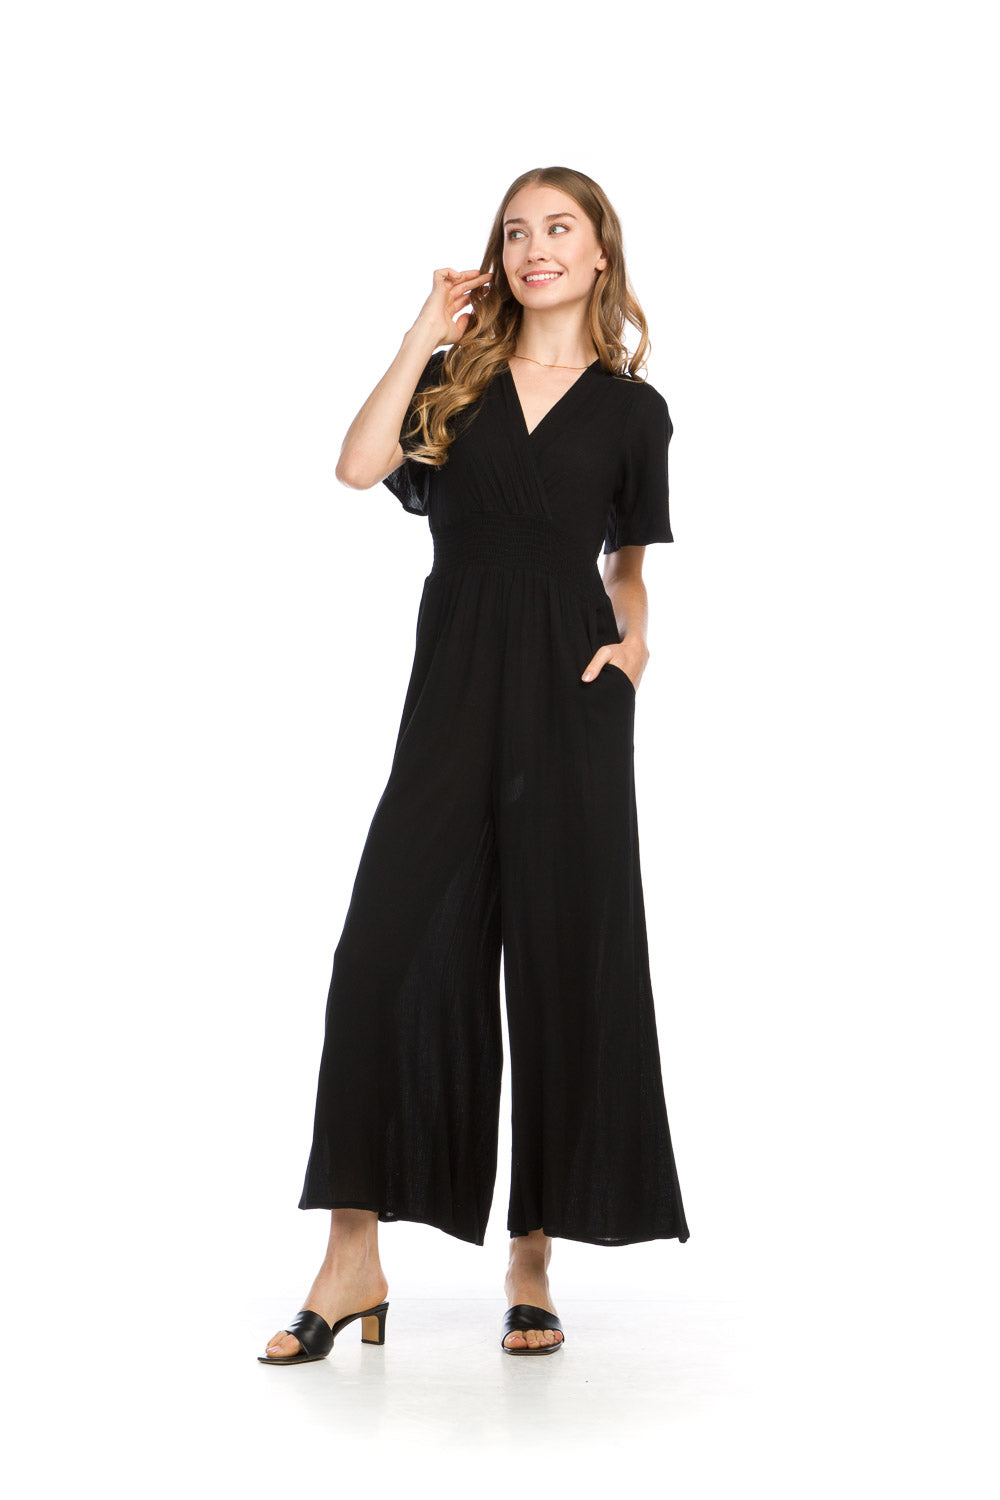 PP-16844 - CRINKLE SHORT SLEEVE JUMPSUIT WITH ELASTIC WAIST AND POCKETS